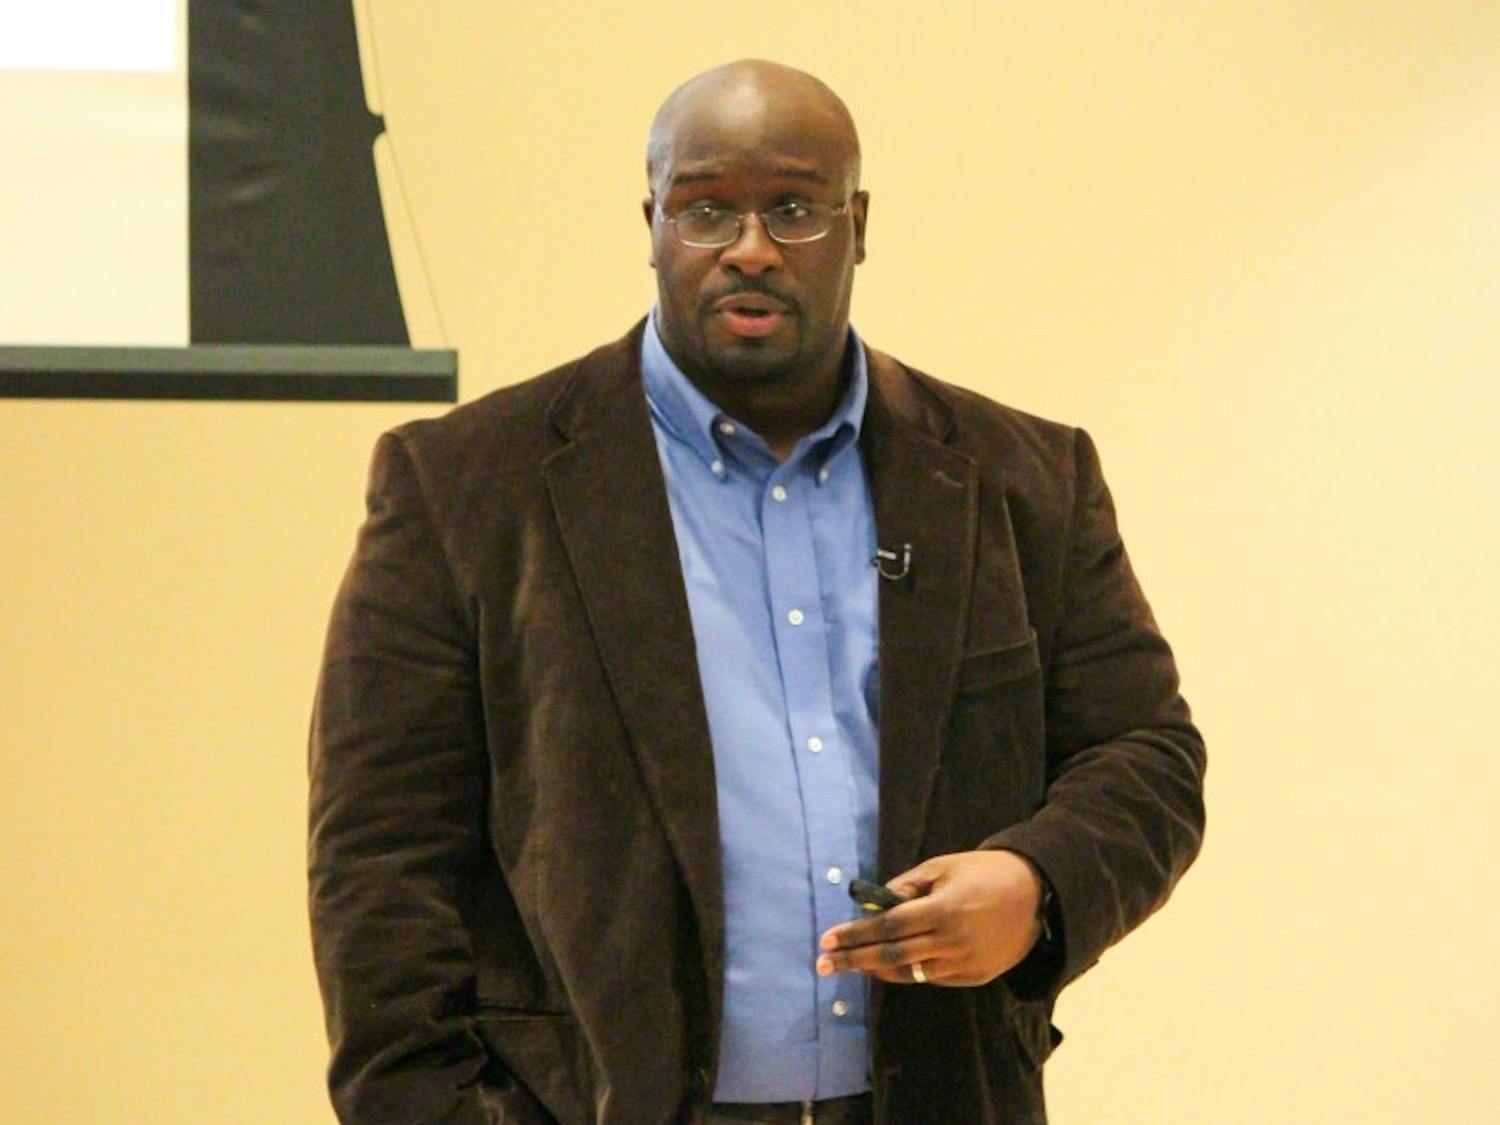 Jamein Cunningham of Portland State University discussed legal and racial relations in the 1960s and ’70s at Thursday’s Institute for Research on Poverty seminar.